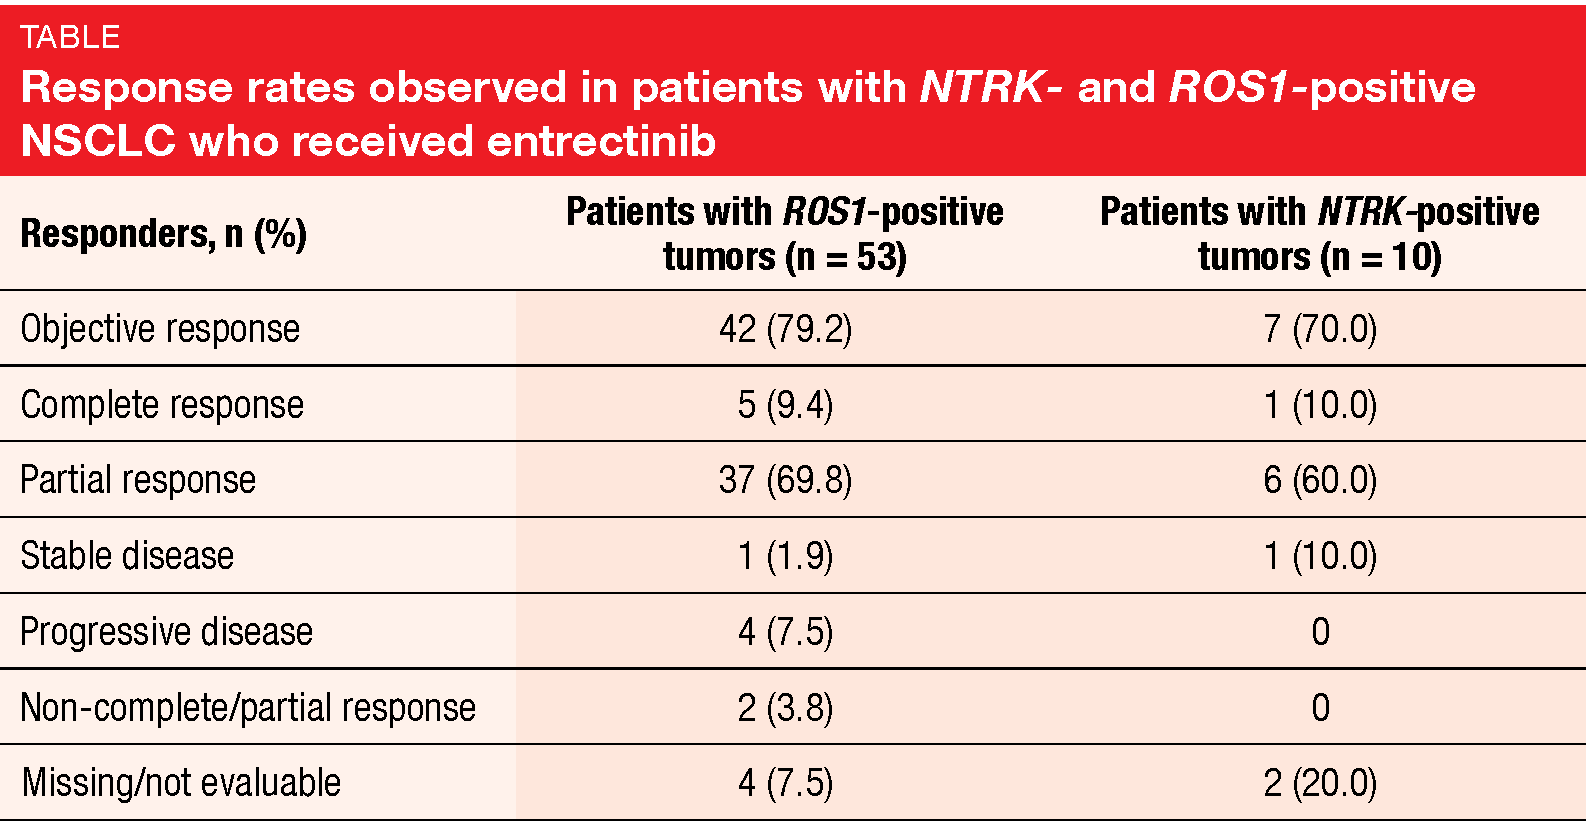 Response rates observed in patients with NTRK- and ROS1-positive NSCLC who recieved entrectinib